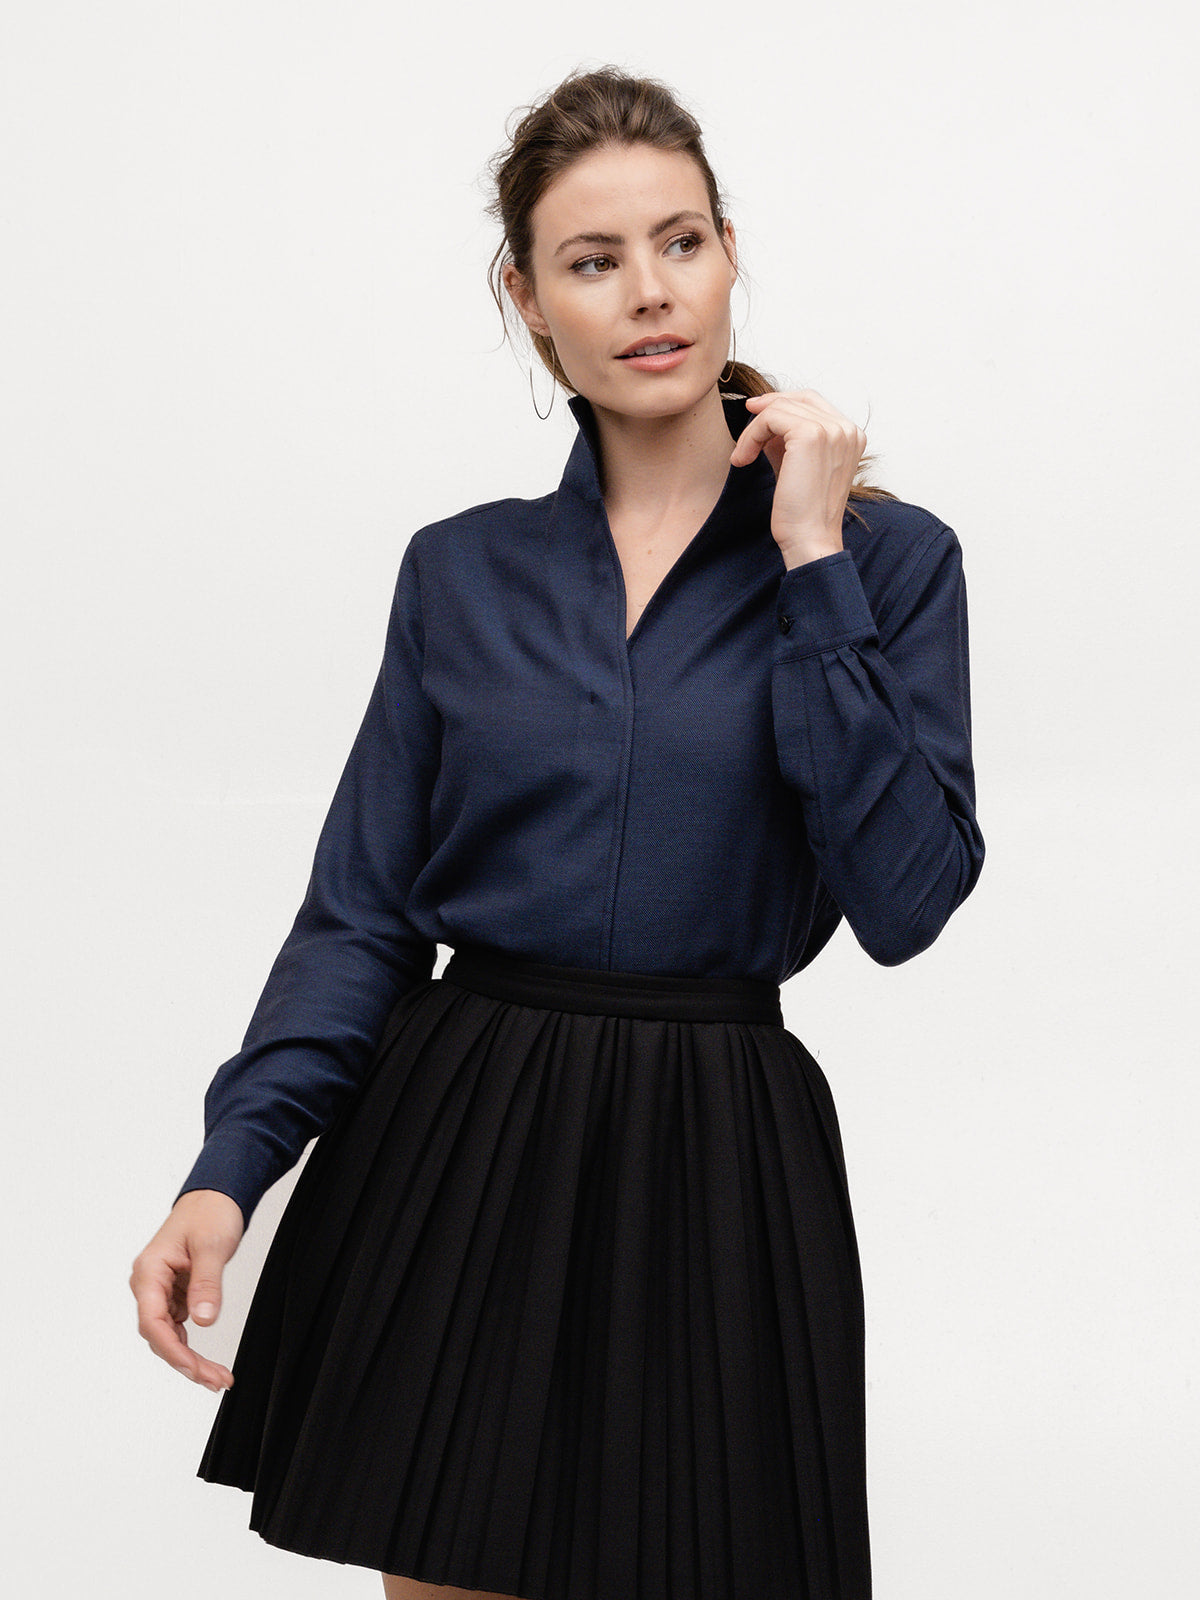 The Signature Shirt for Women of Every Shape and Age– Sarah Alexandra